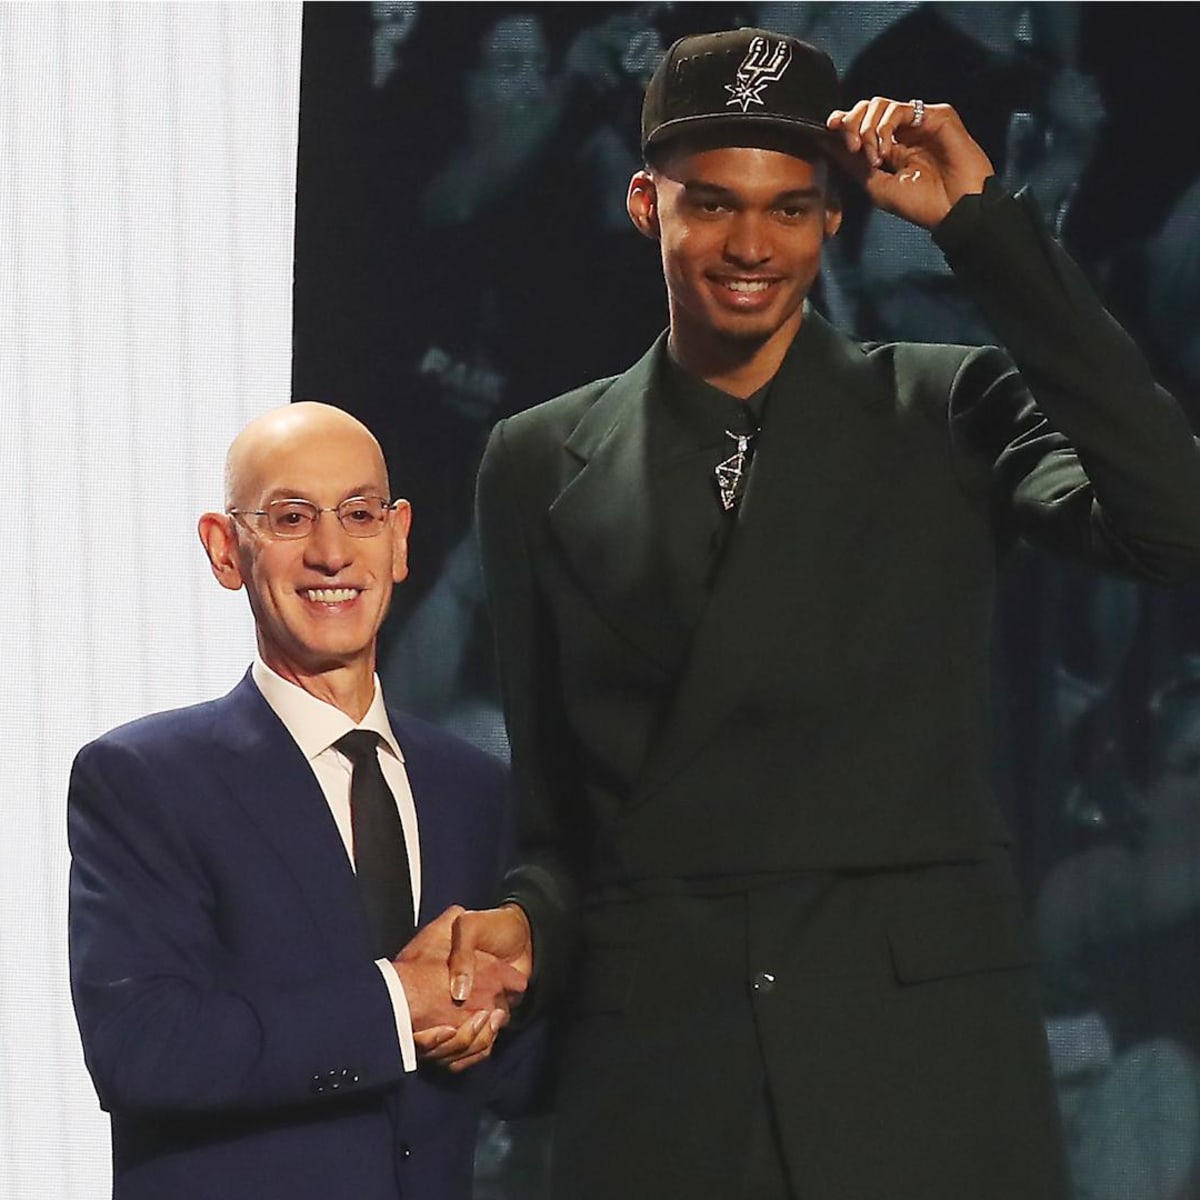 2023 NBA draft: Five burning questions - Sports Illustrated